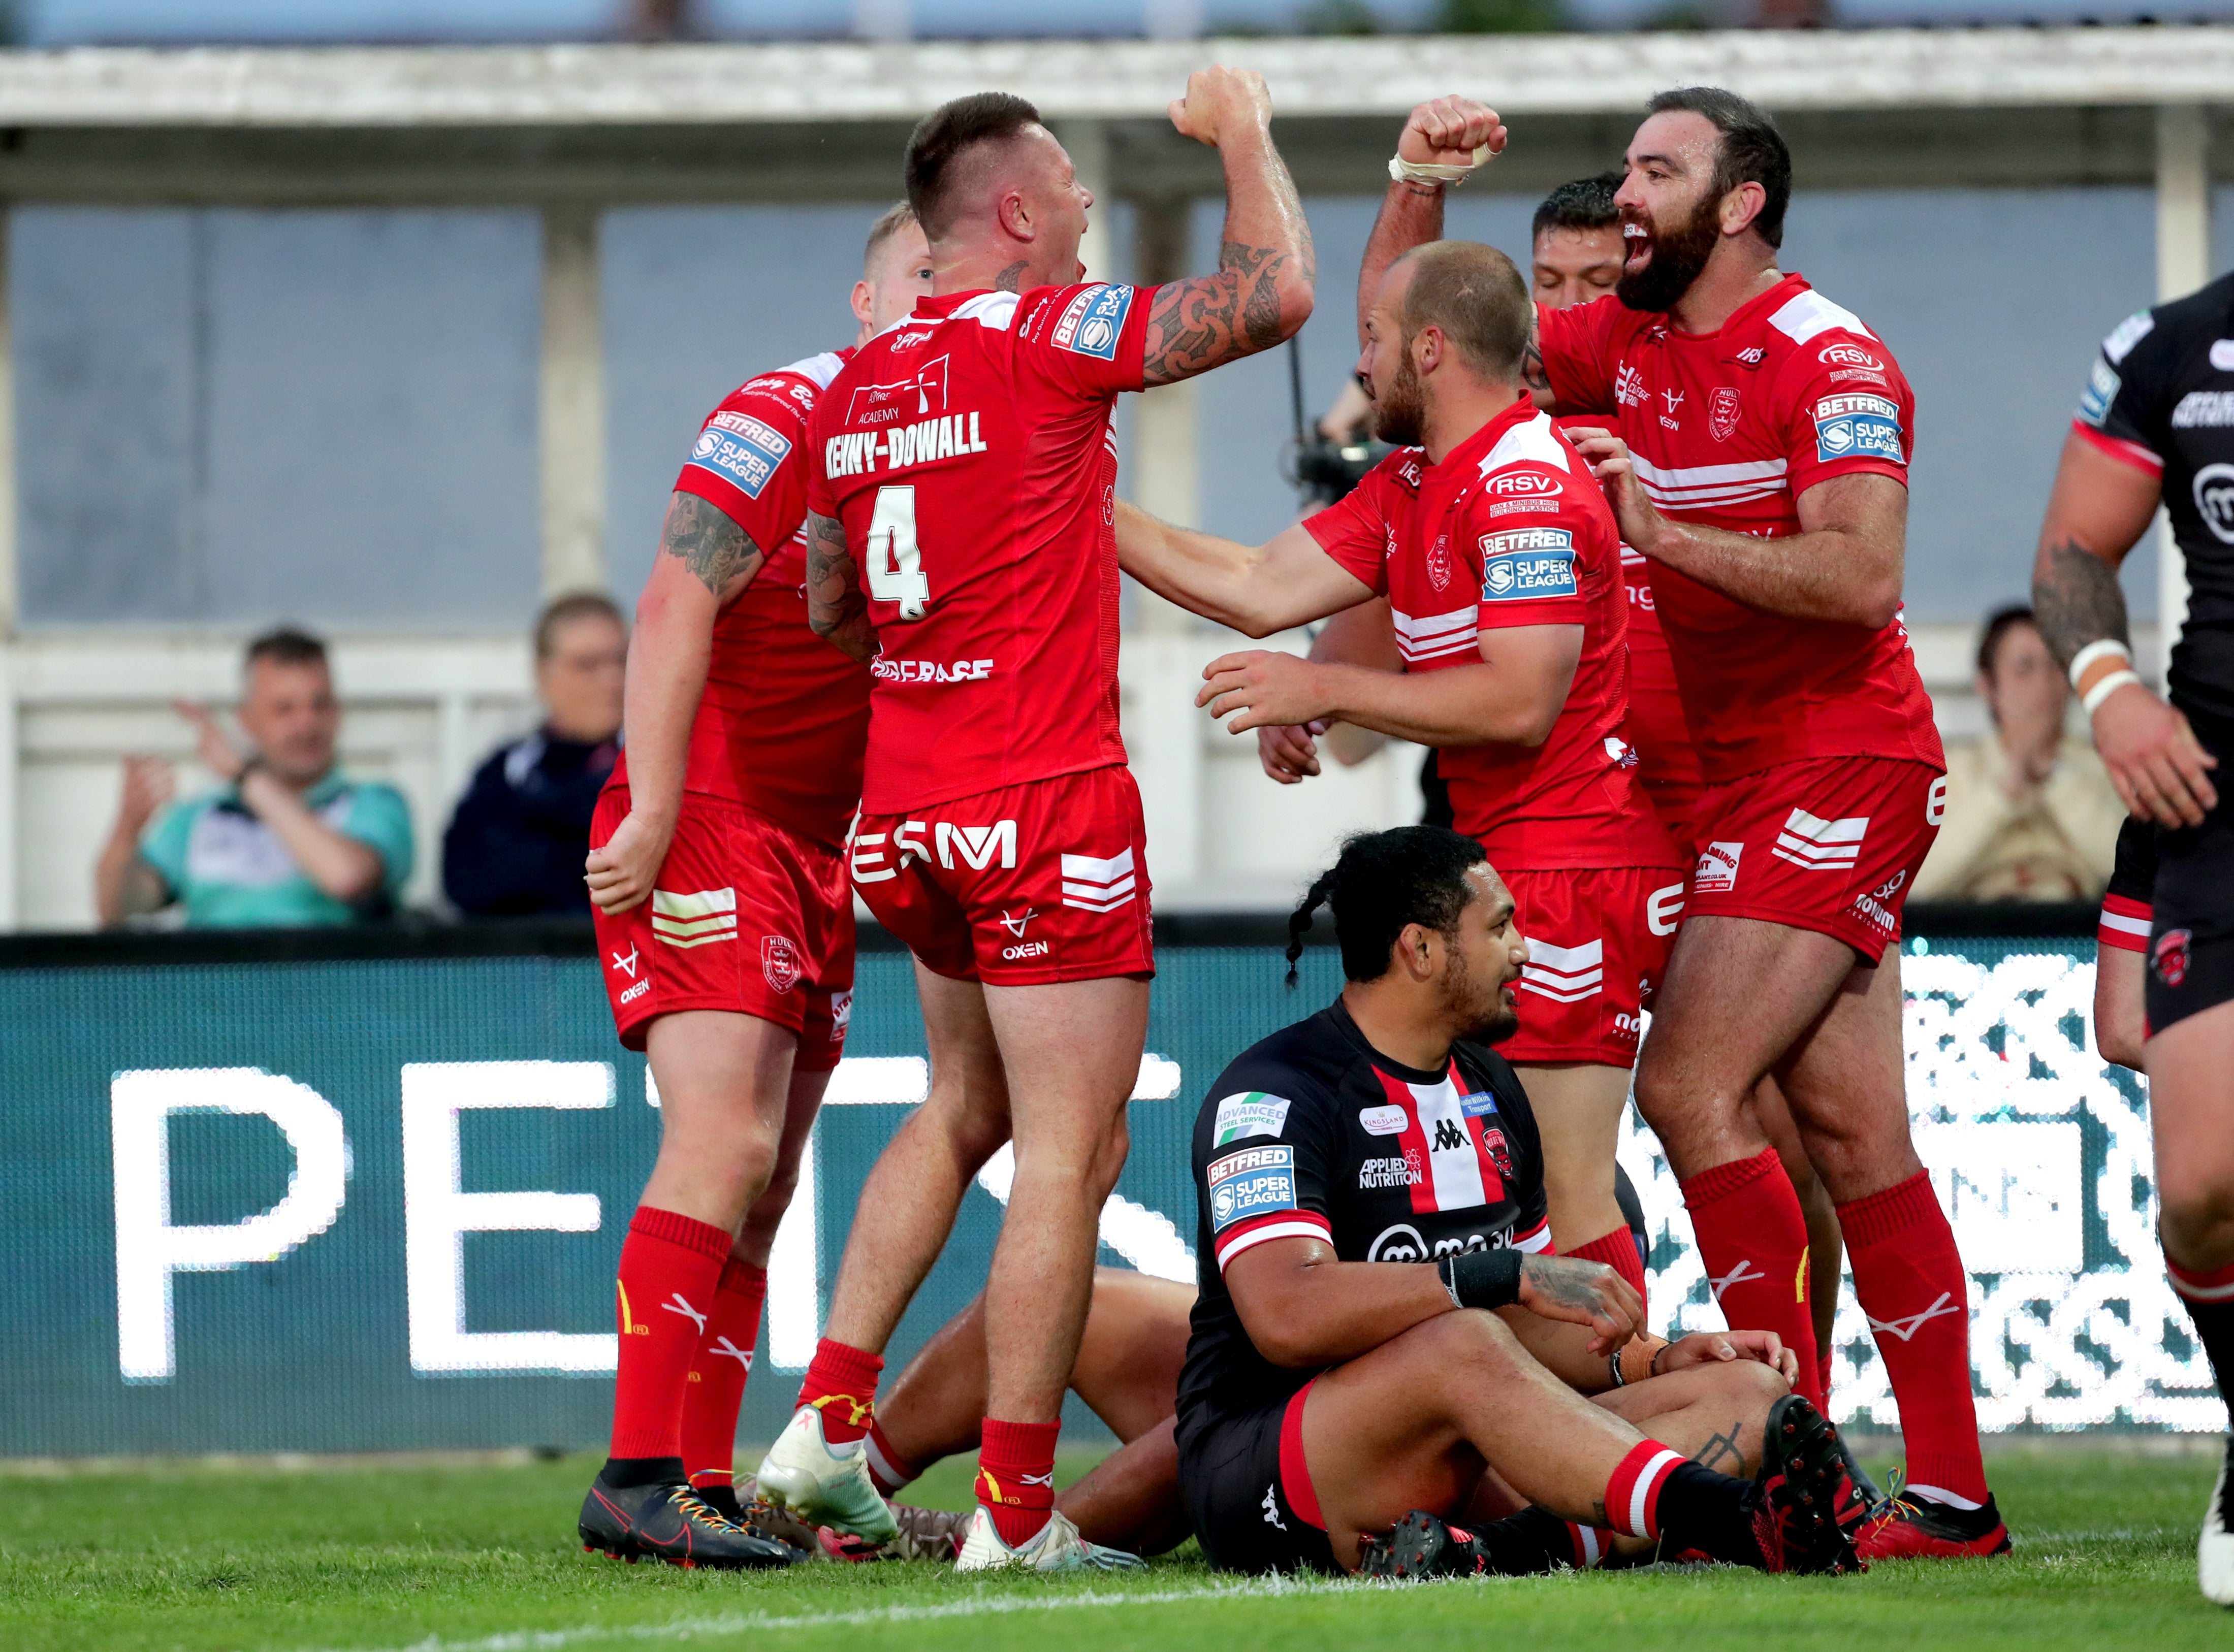 Hull KR have had six Super League fixtures postponed and still need to play seven more to qualify for the play-offs (PA Images/Richard Sellers)